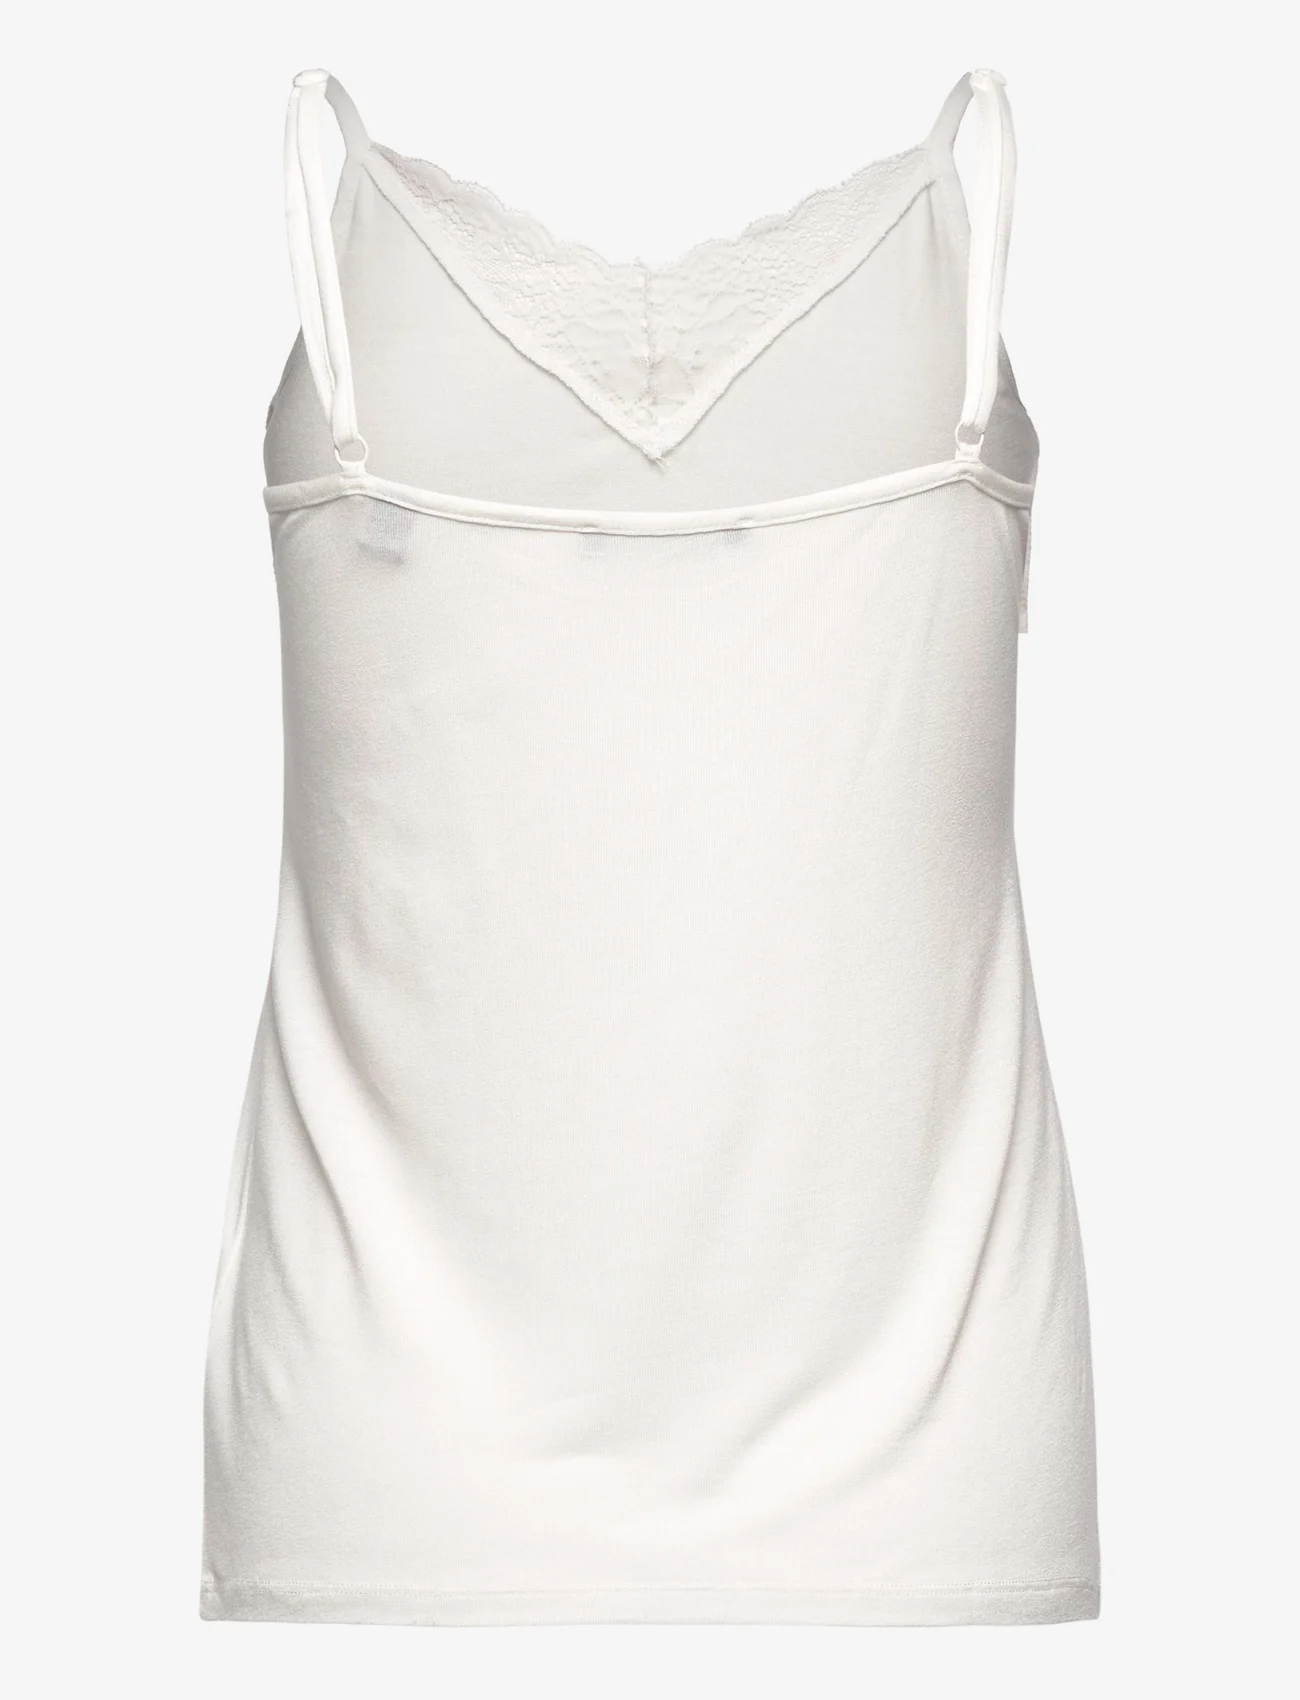 Esprit Collection - Top with lace, LENZING™ ECOVERO™ - die niedrigsten preise - off white - 1